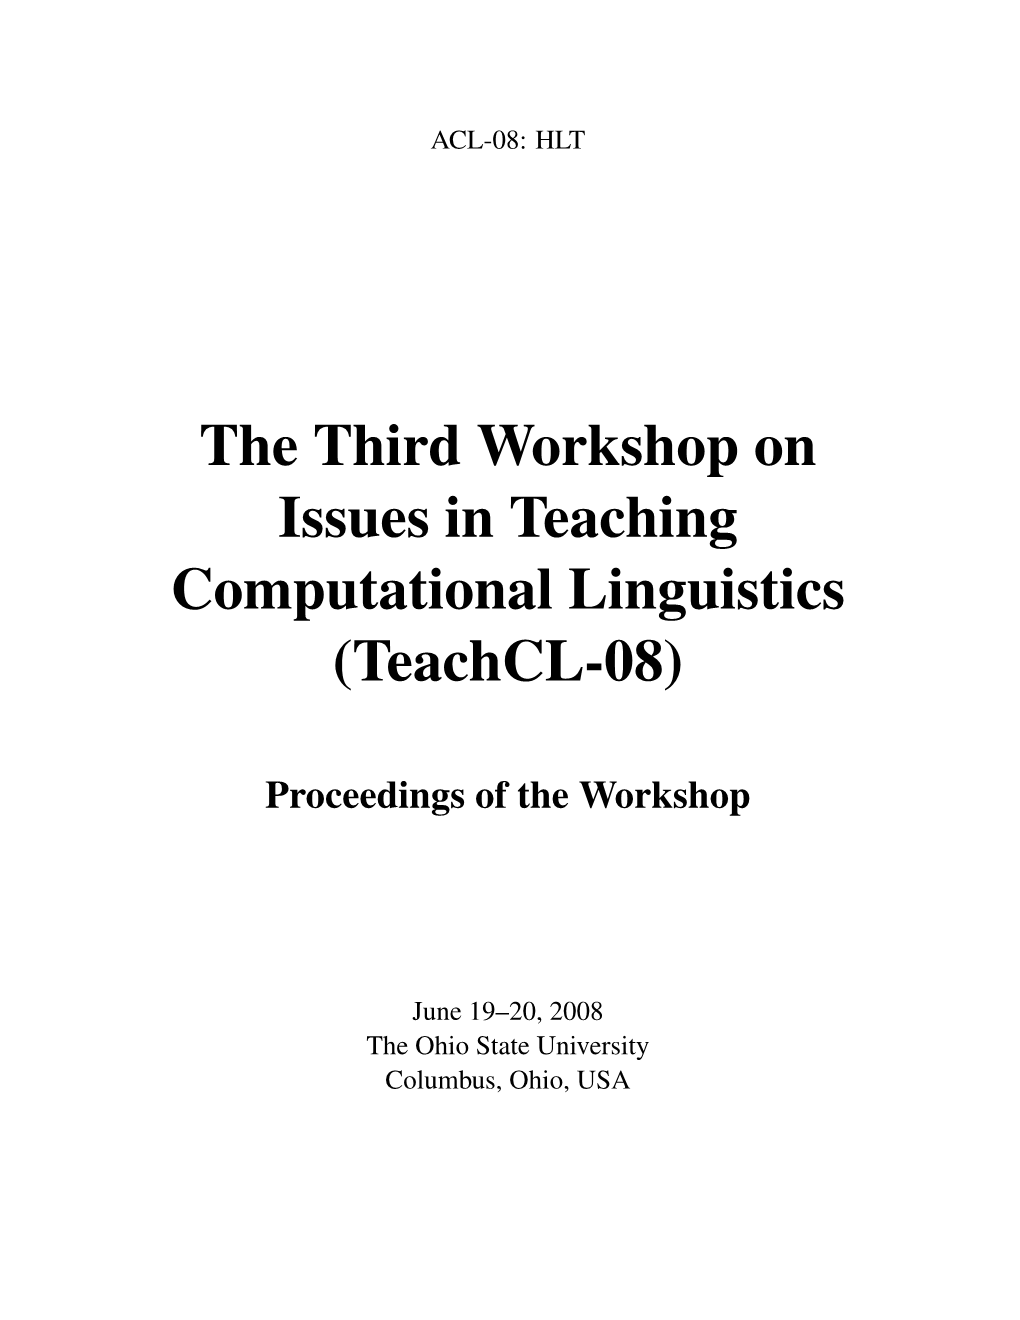 The Third Workshop on Issues in Teaching Computational Linguistics (Teachcl-08)